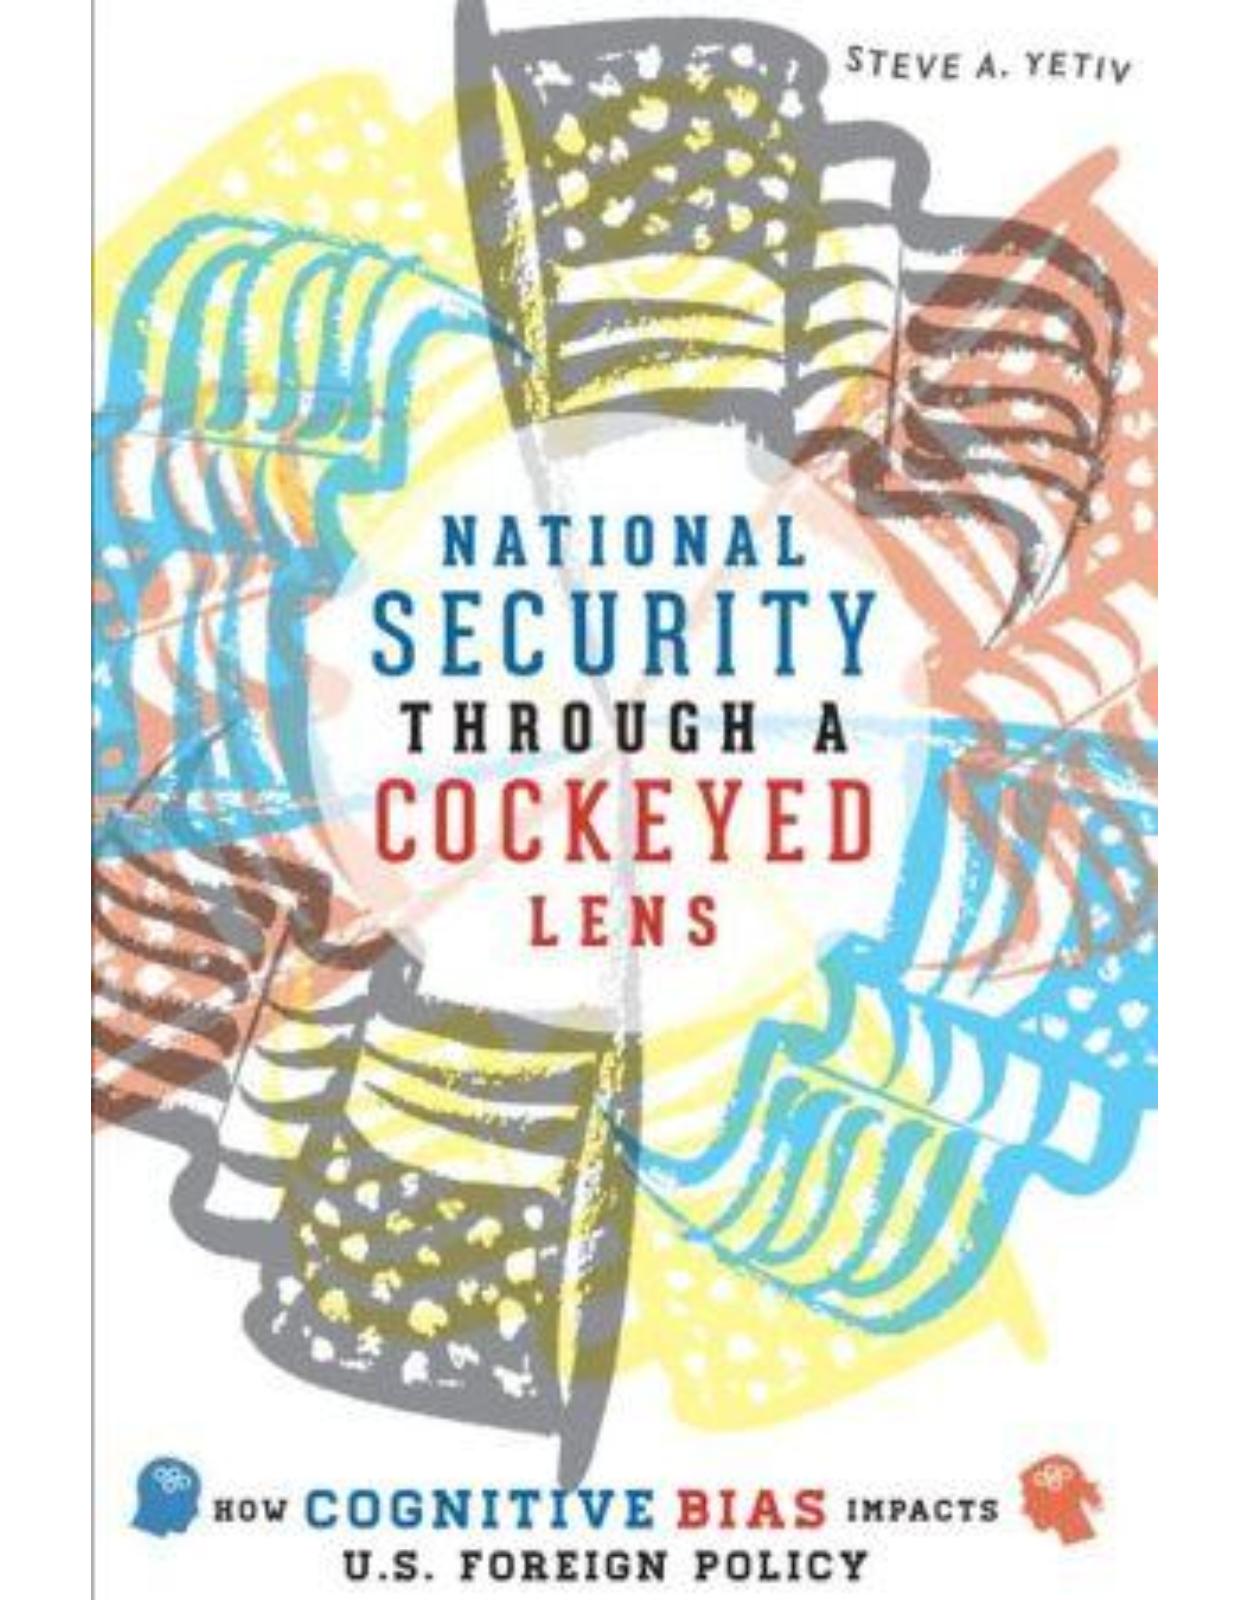 National Security through a Cockeyed Lens. How Cognitive Bias Impacts U.S. Foreign Policy